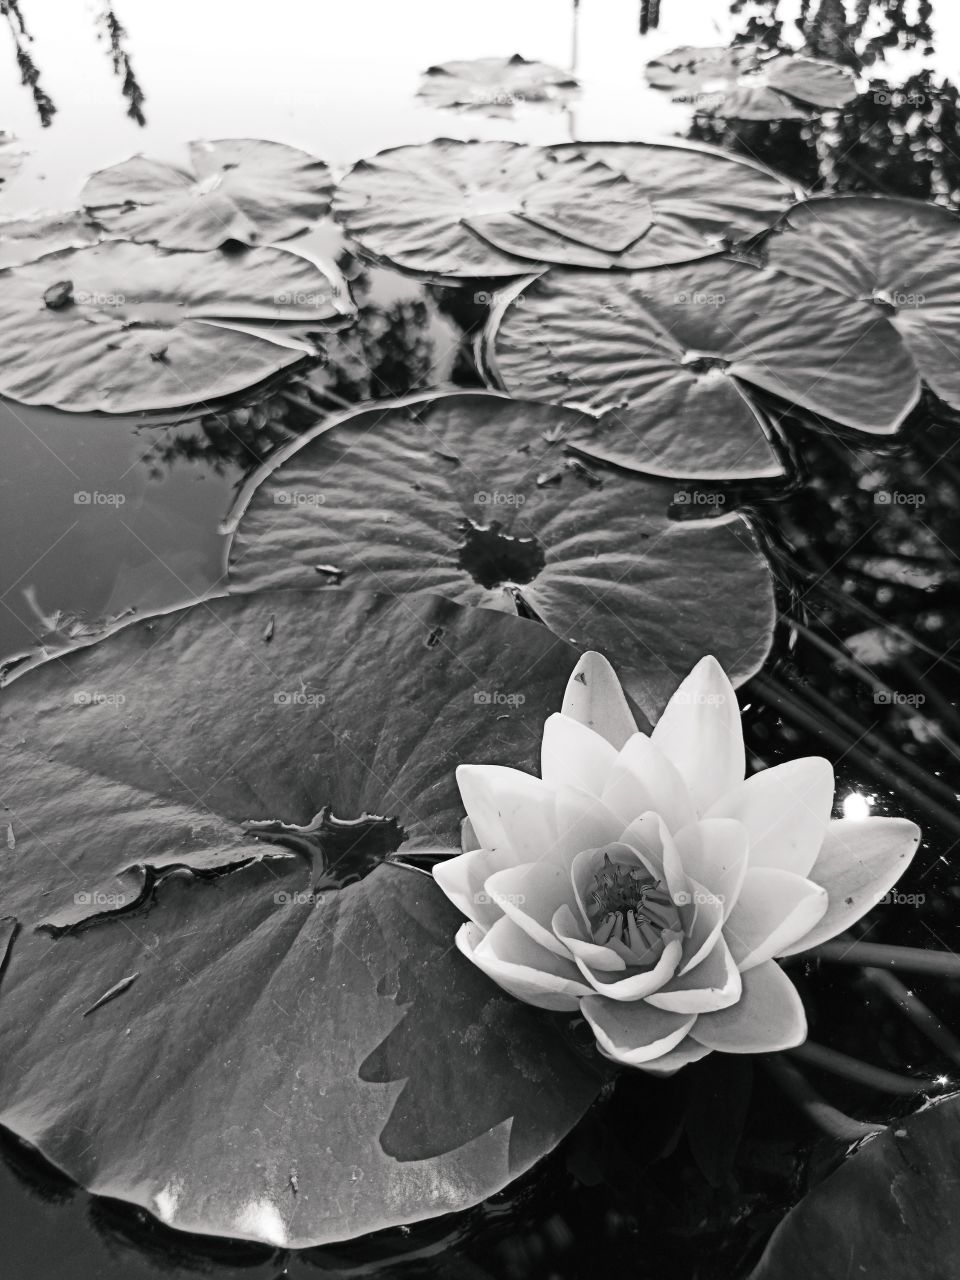 lotus flower in pond in black and white. water lily with leaves